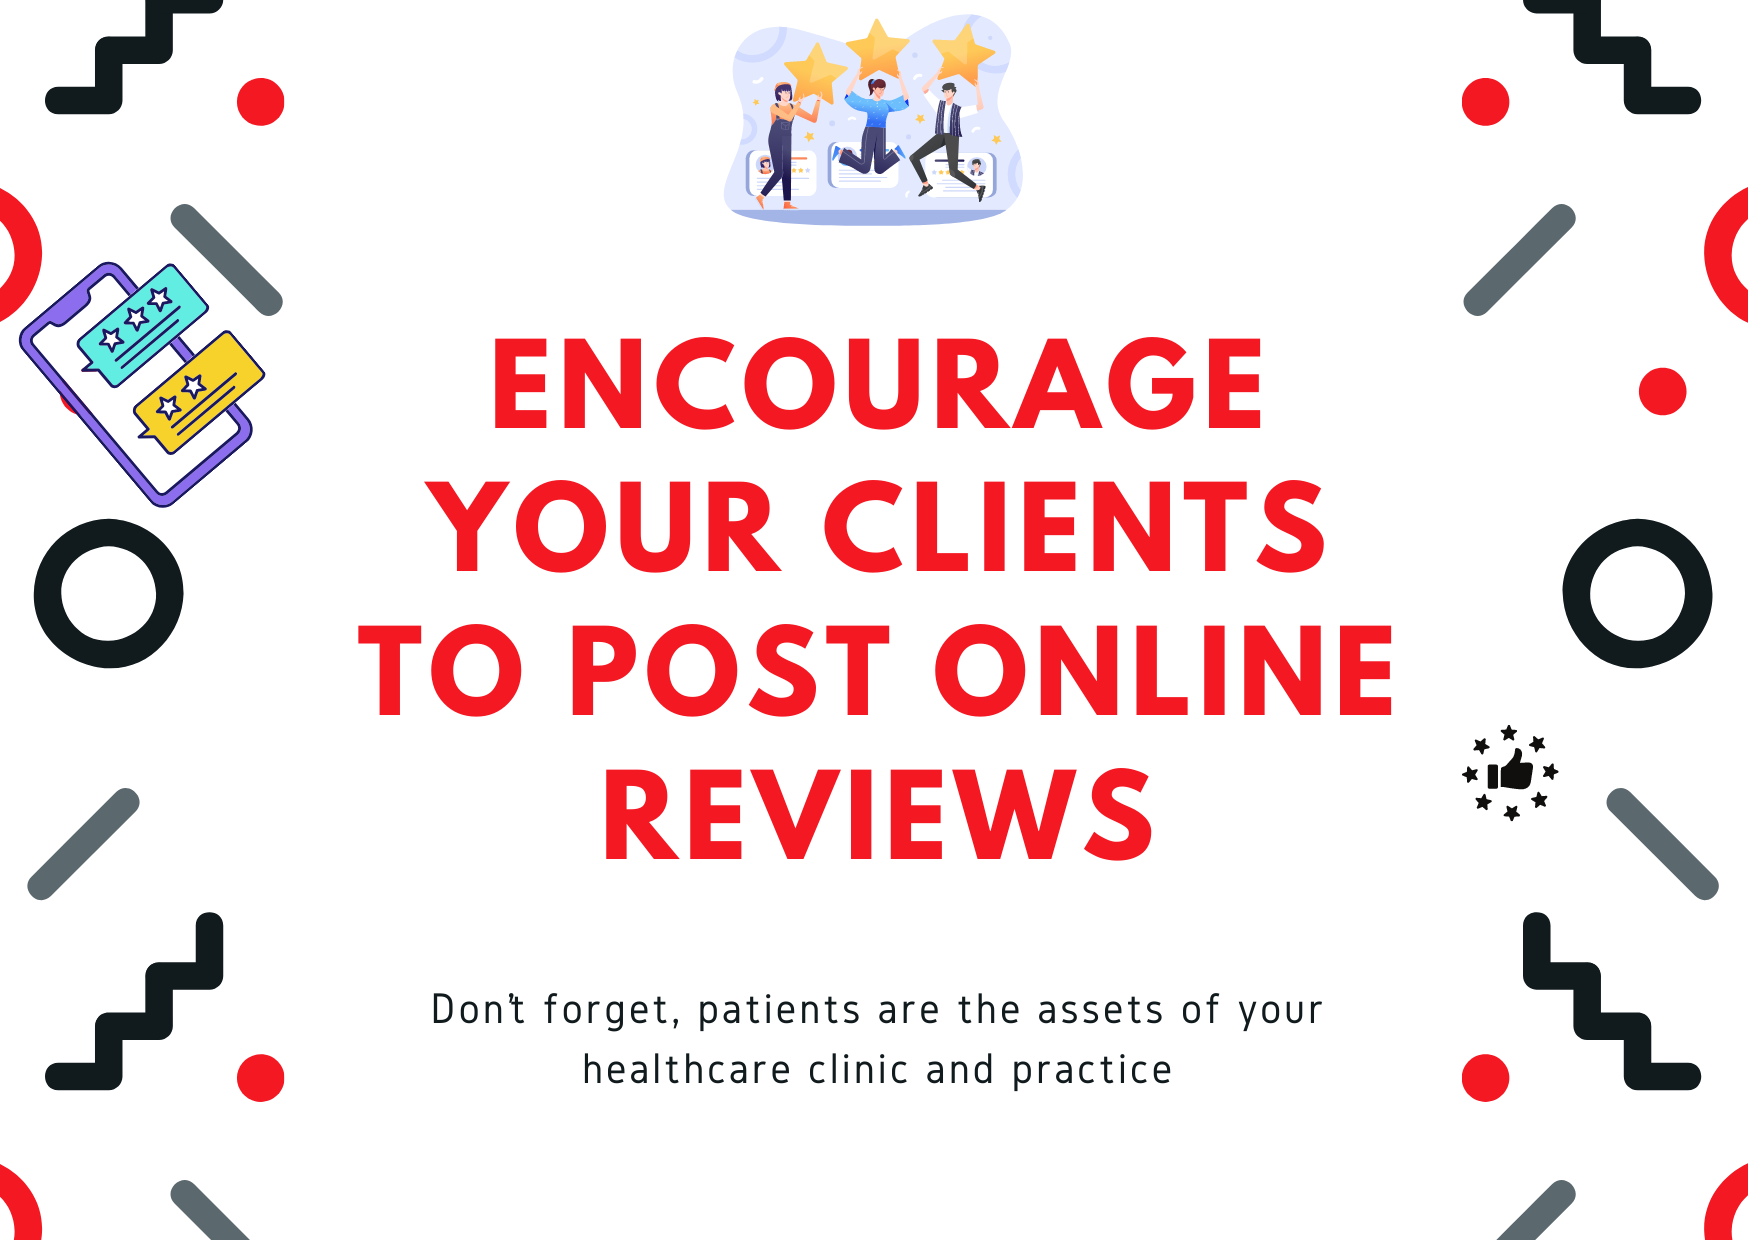 Encourage Your Clients to Post Online Reviews